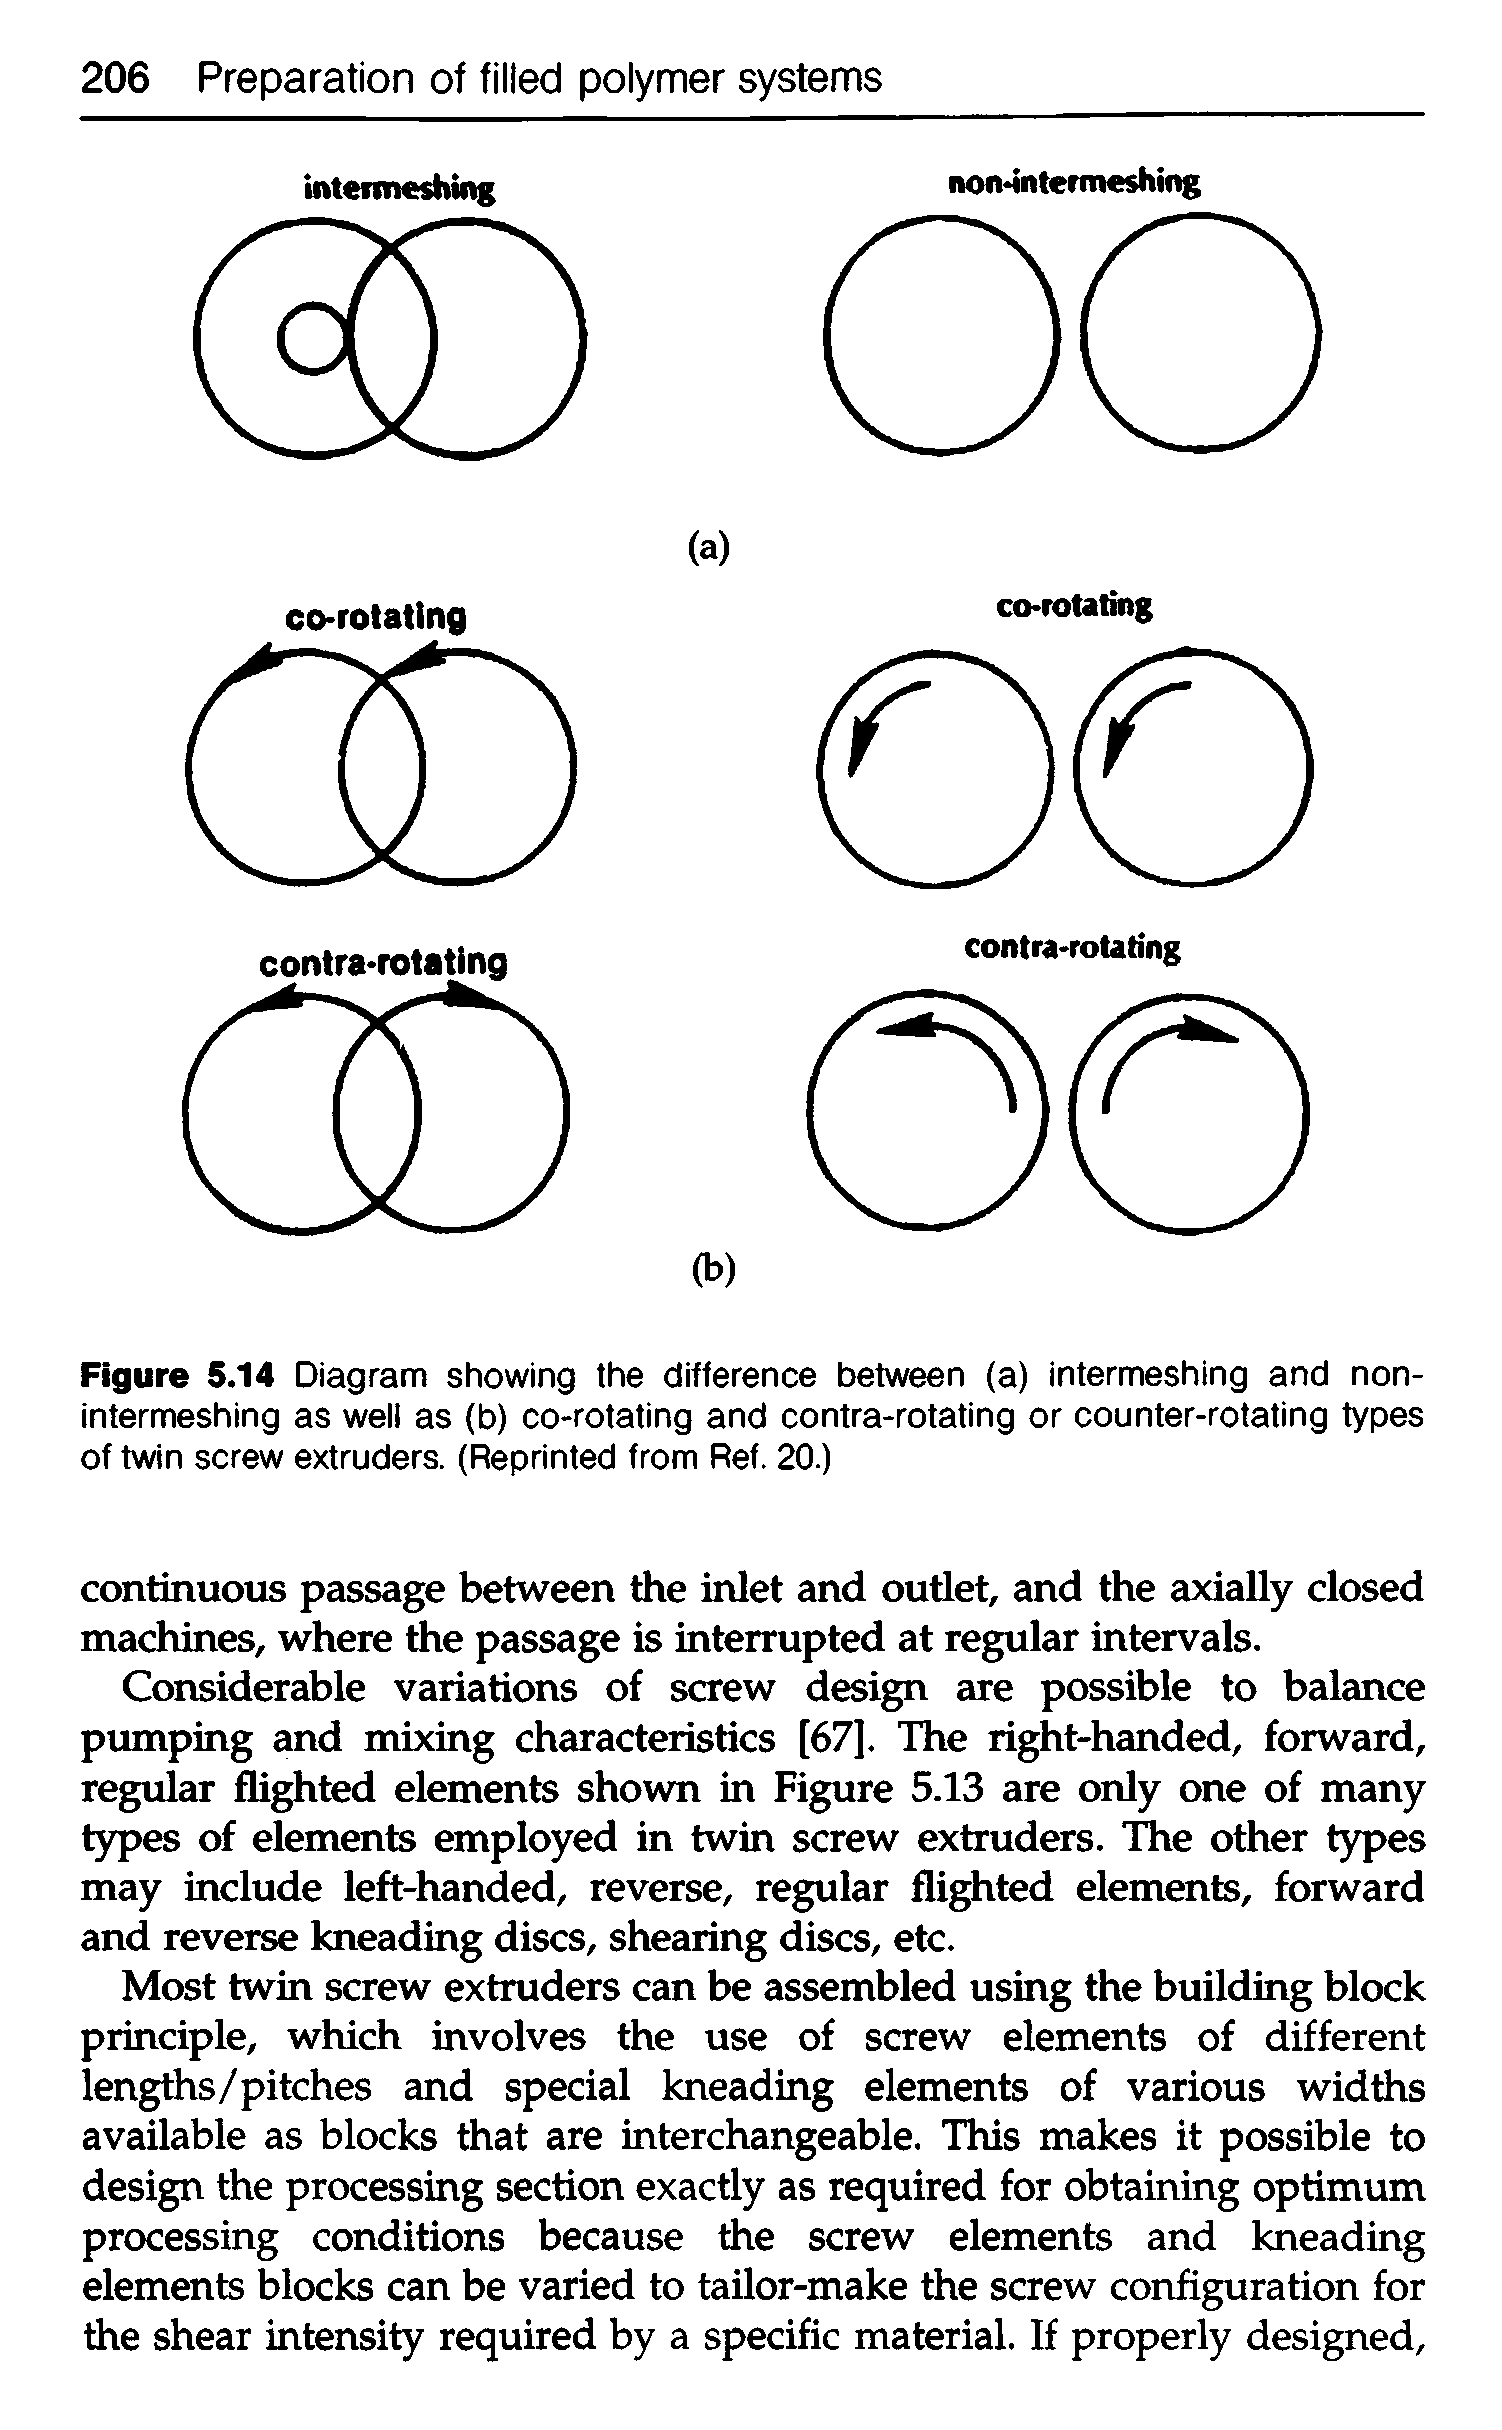 Figure 5.14 Diagram showing the difference between (a) intermeshing and nonintermeshing as well as (b) co-rotating and contra-rotating or counter-rotating types of twin screw extruders. (Fteprinted from Ref. 20.)...